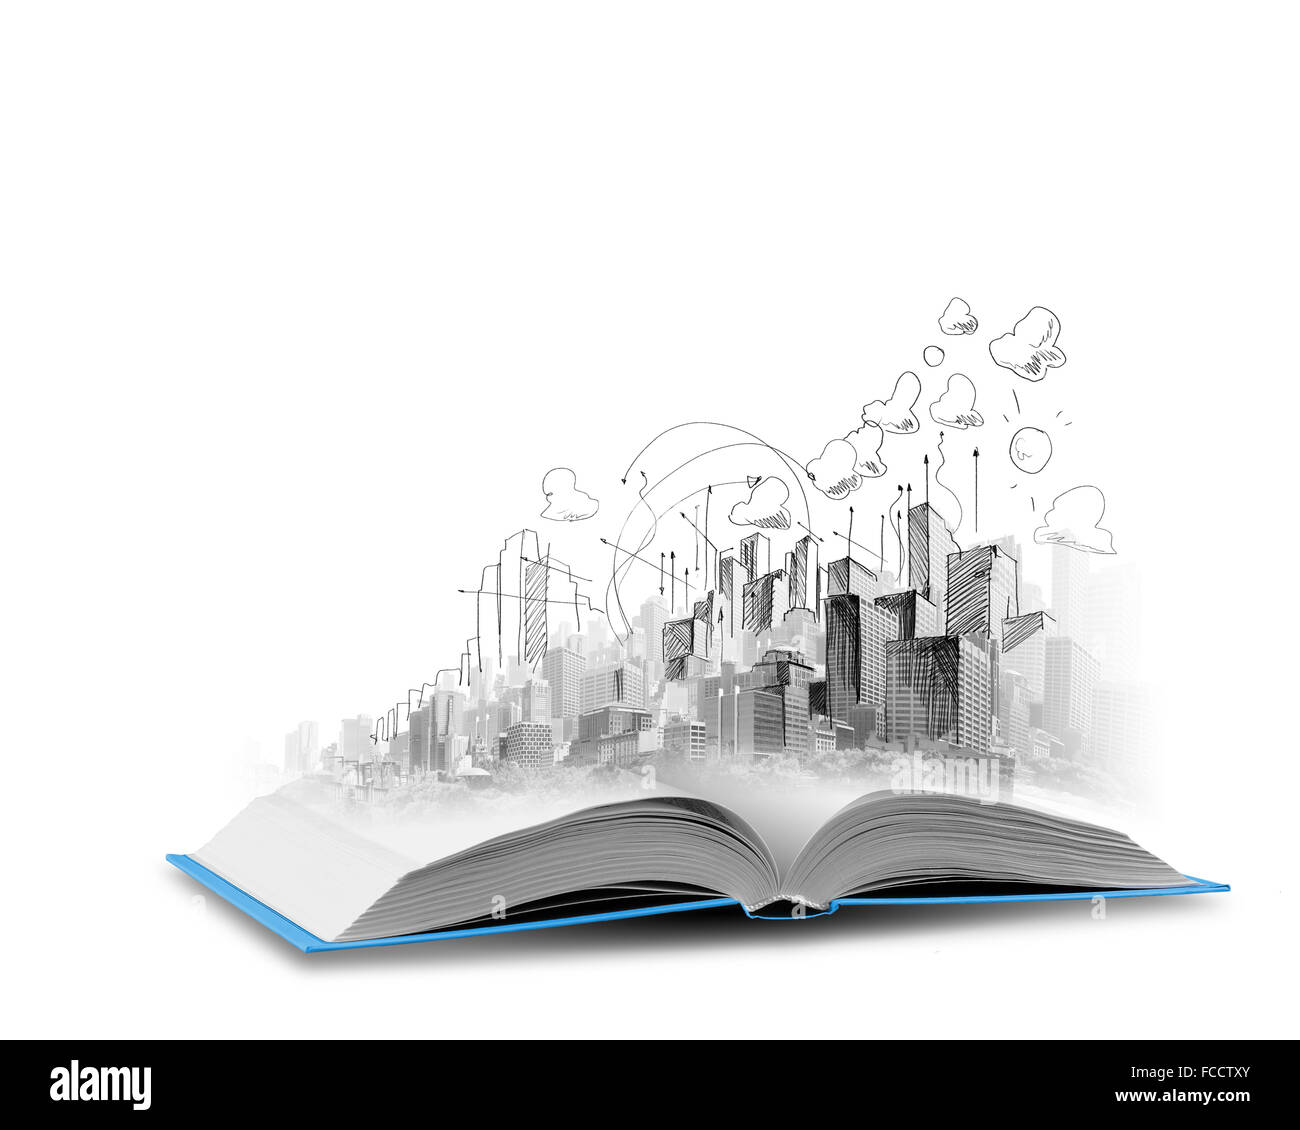 Background image with model sketch of modern city Stock Photo